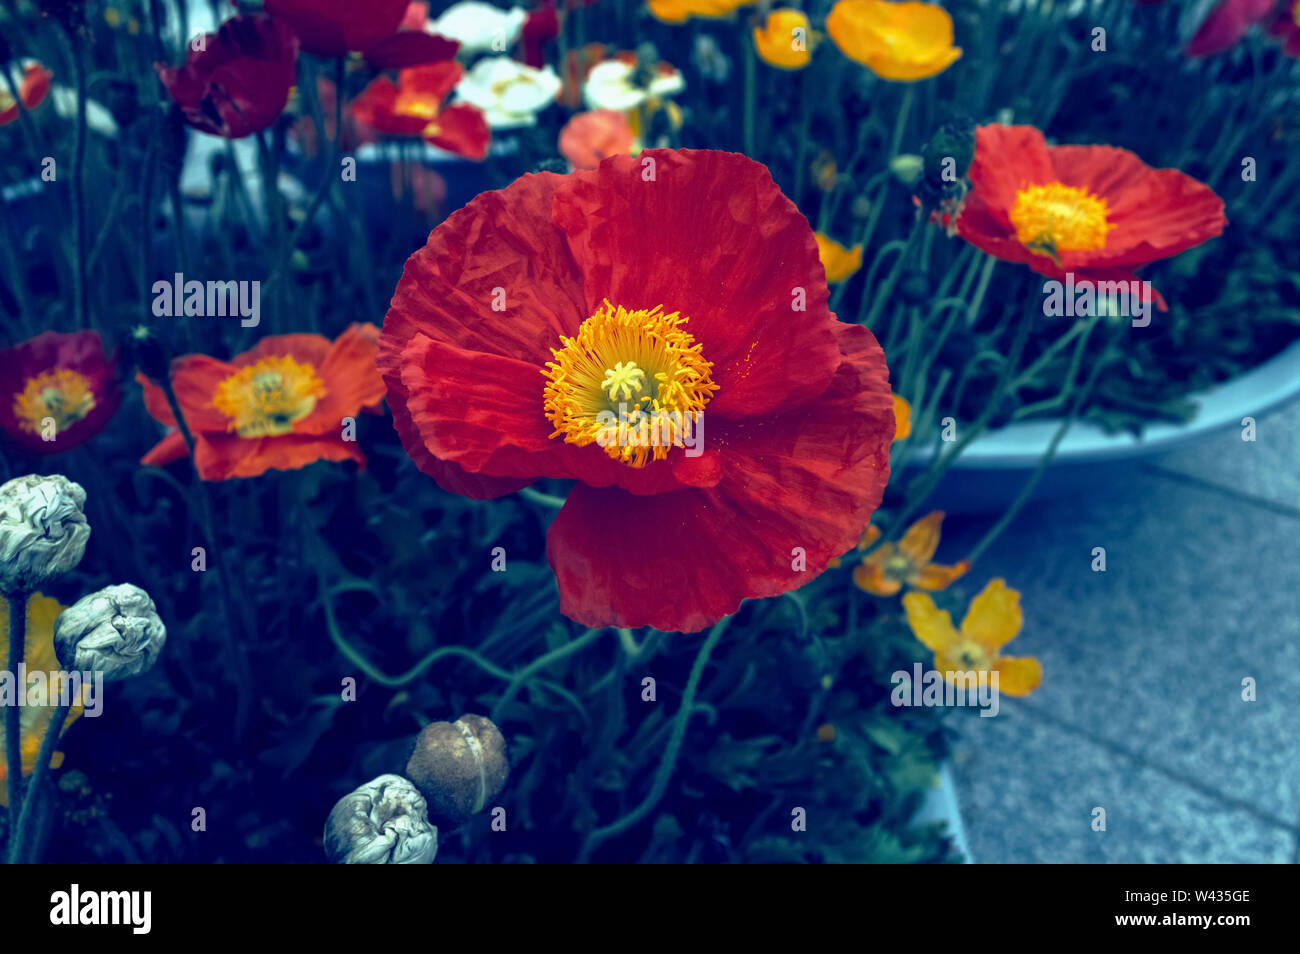 cultivated multicolored iceland poppies in flower pots outdoor Stock Photo